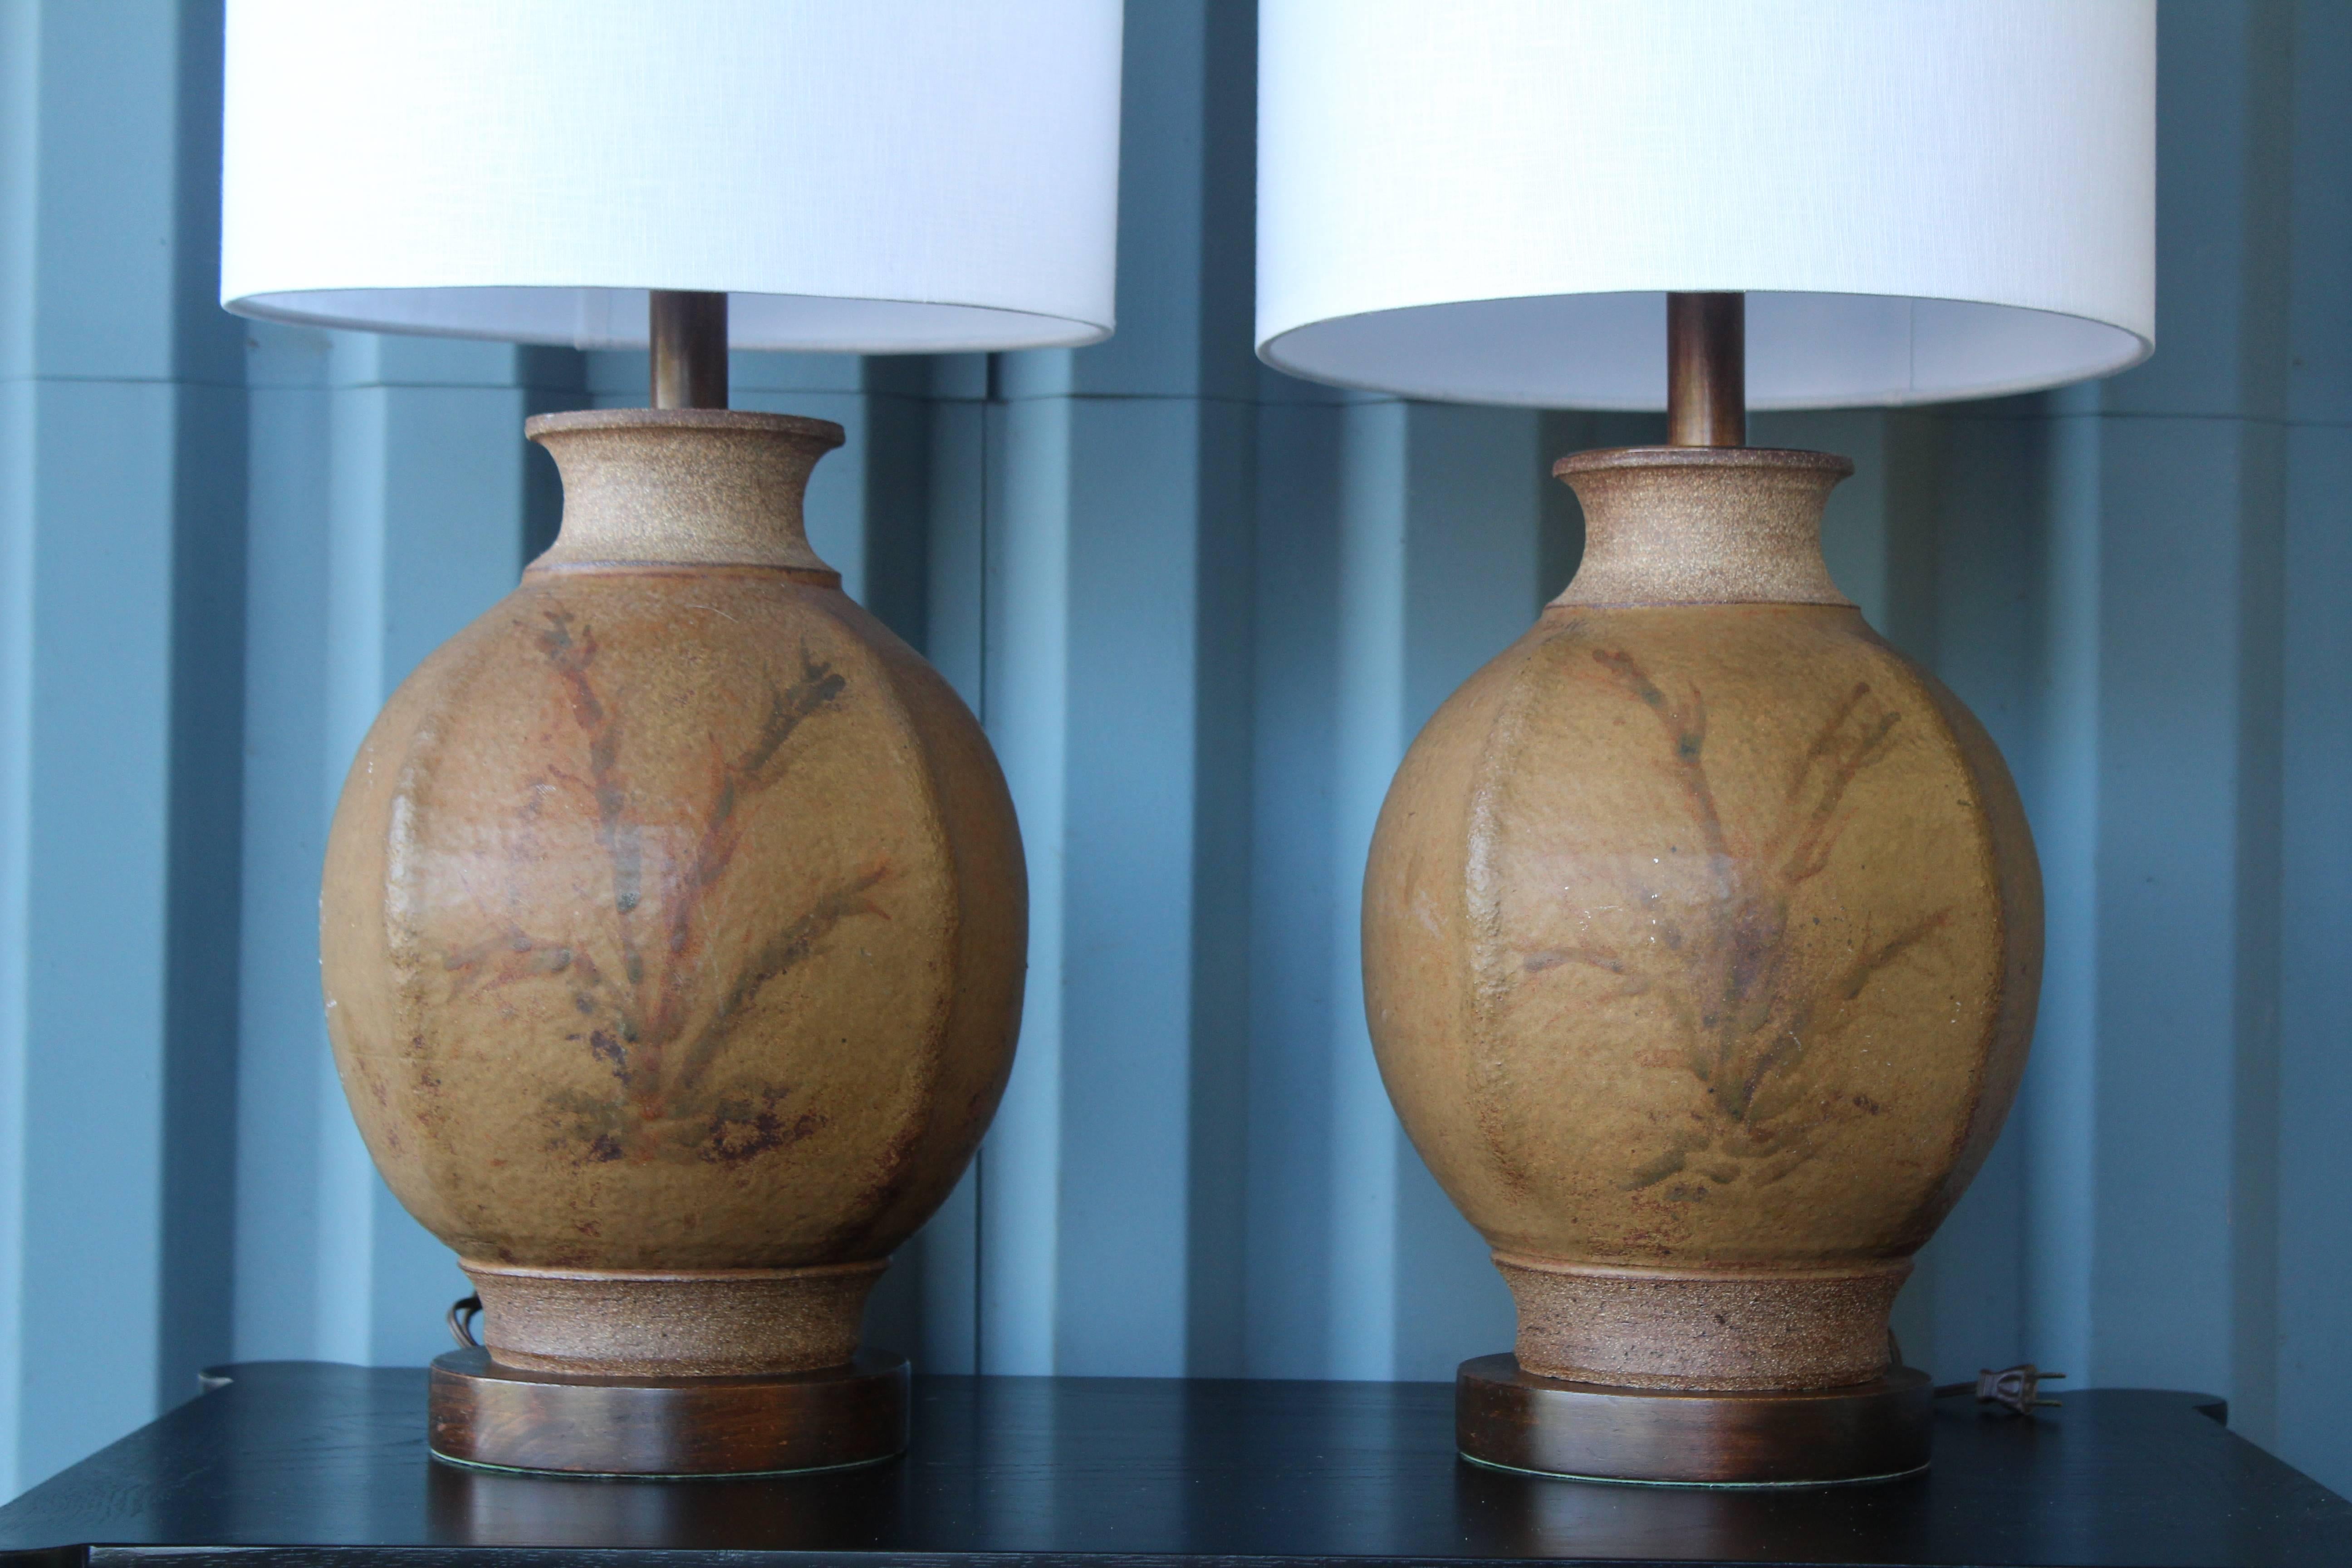 Pair of 1960s hand thrown stoneware lamps by Brent Bennett. Signed near the bottom of each lamp. Includes white linen shade.